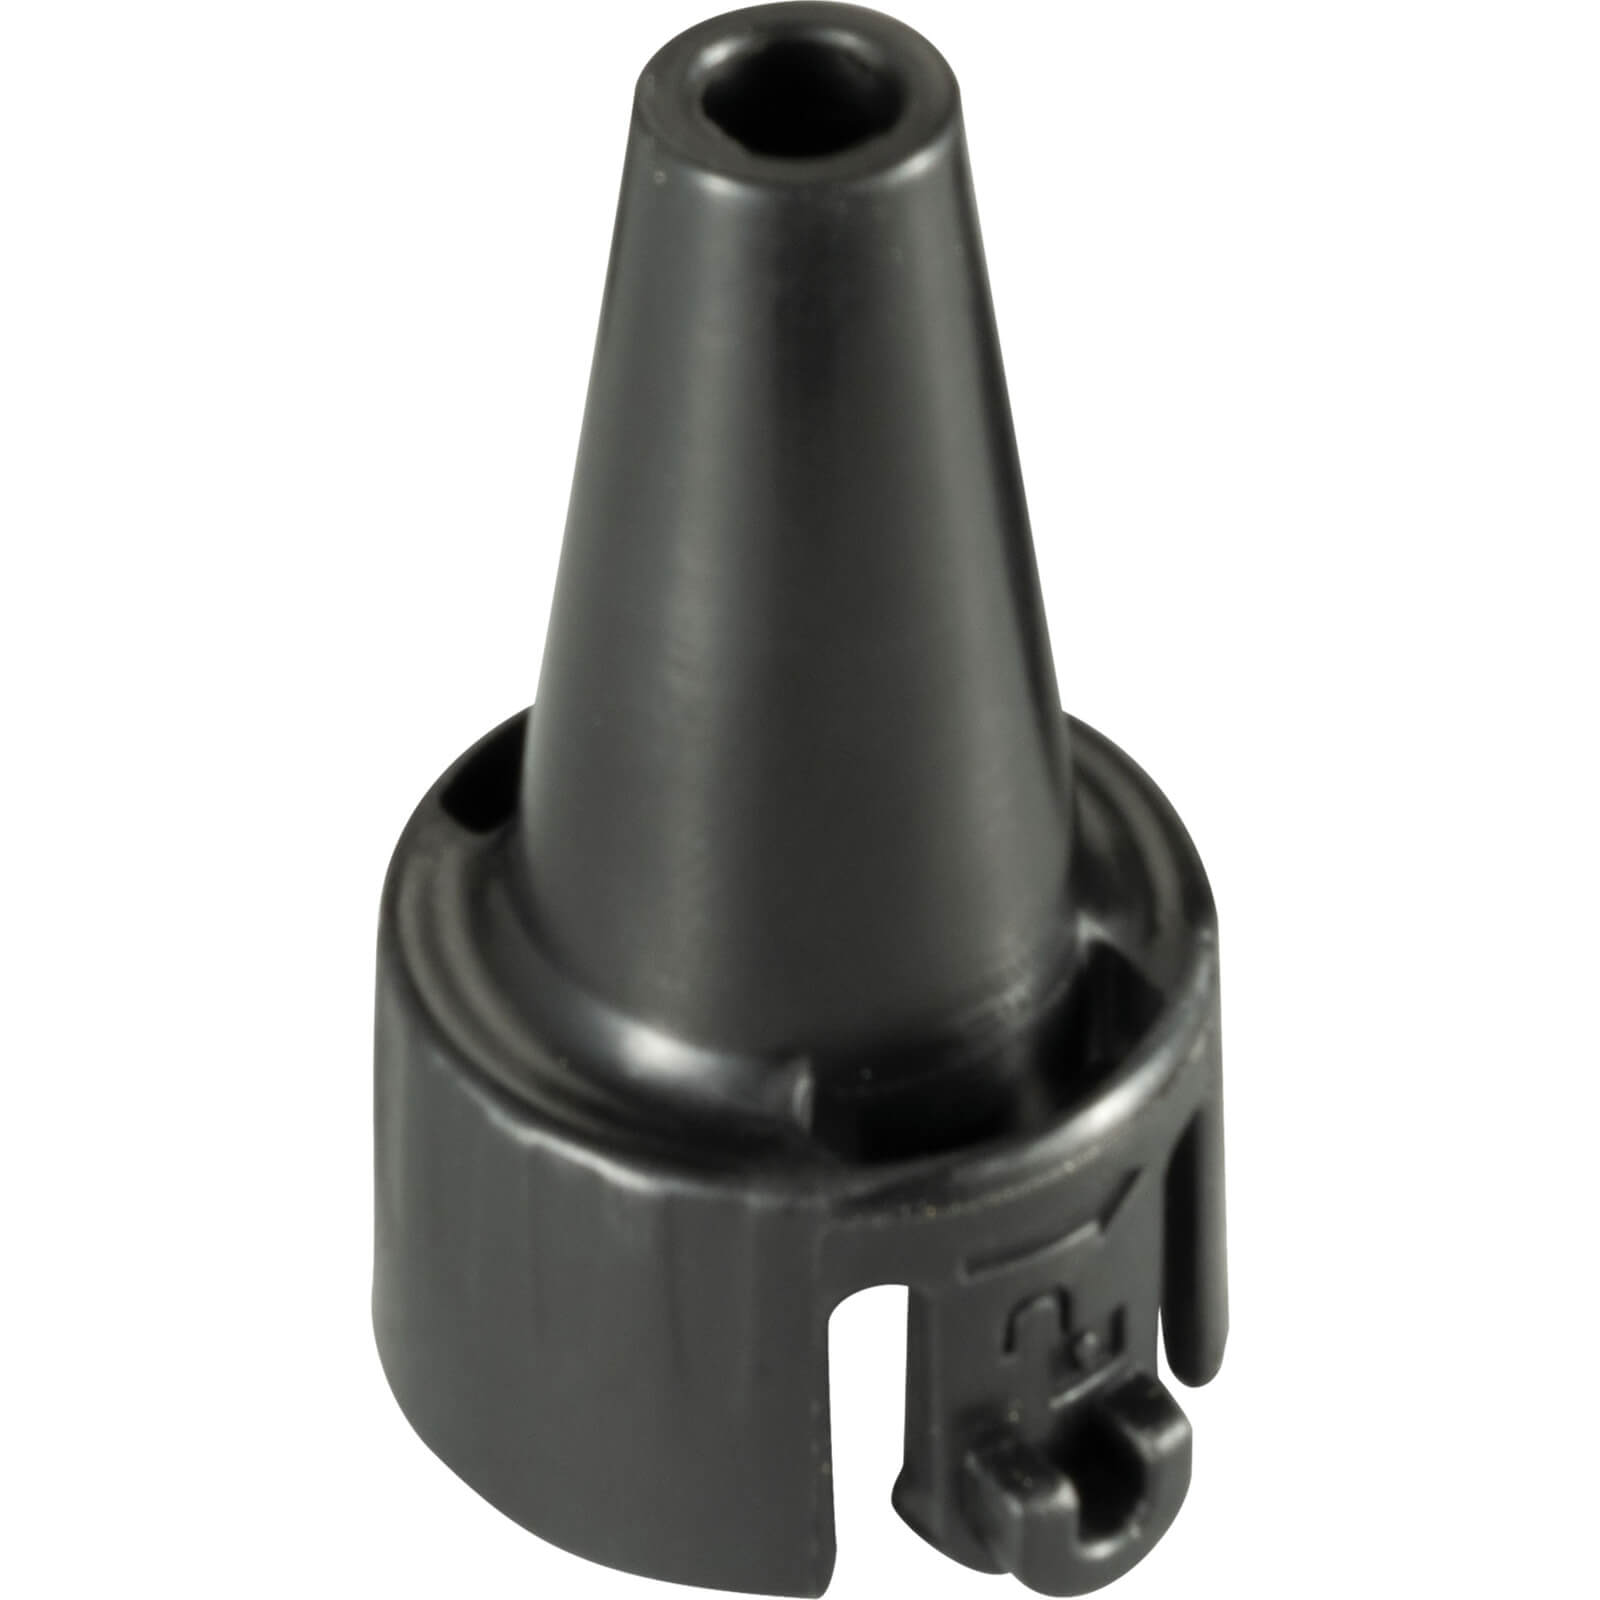 Image of Makita Nozzle 7 for AS001G Dust Blower